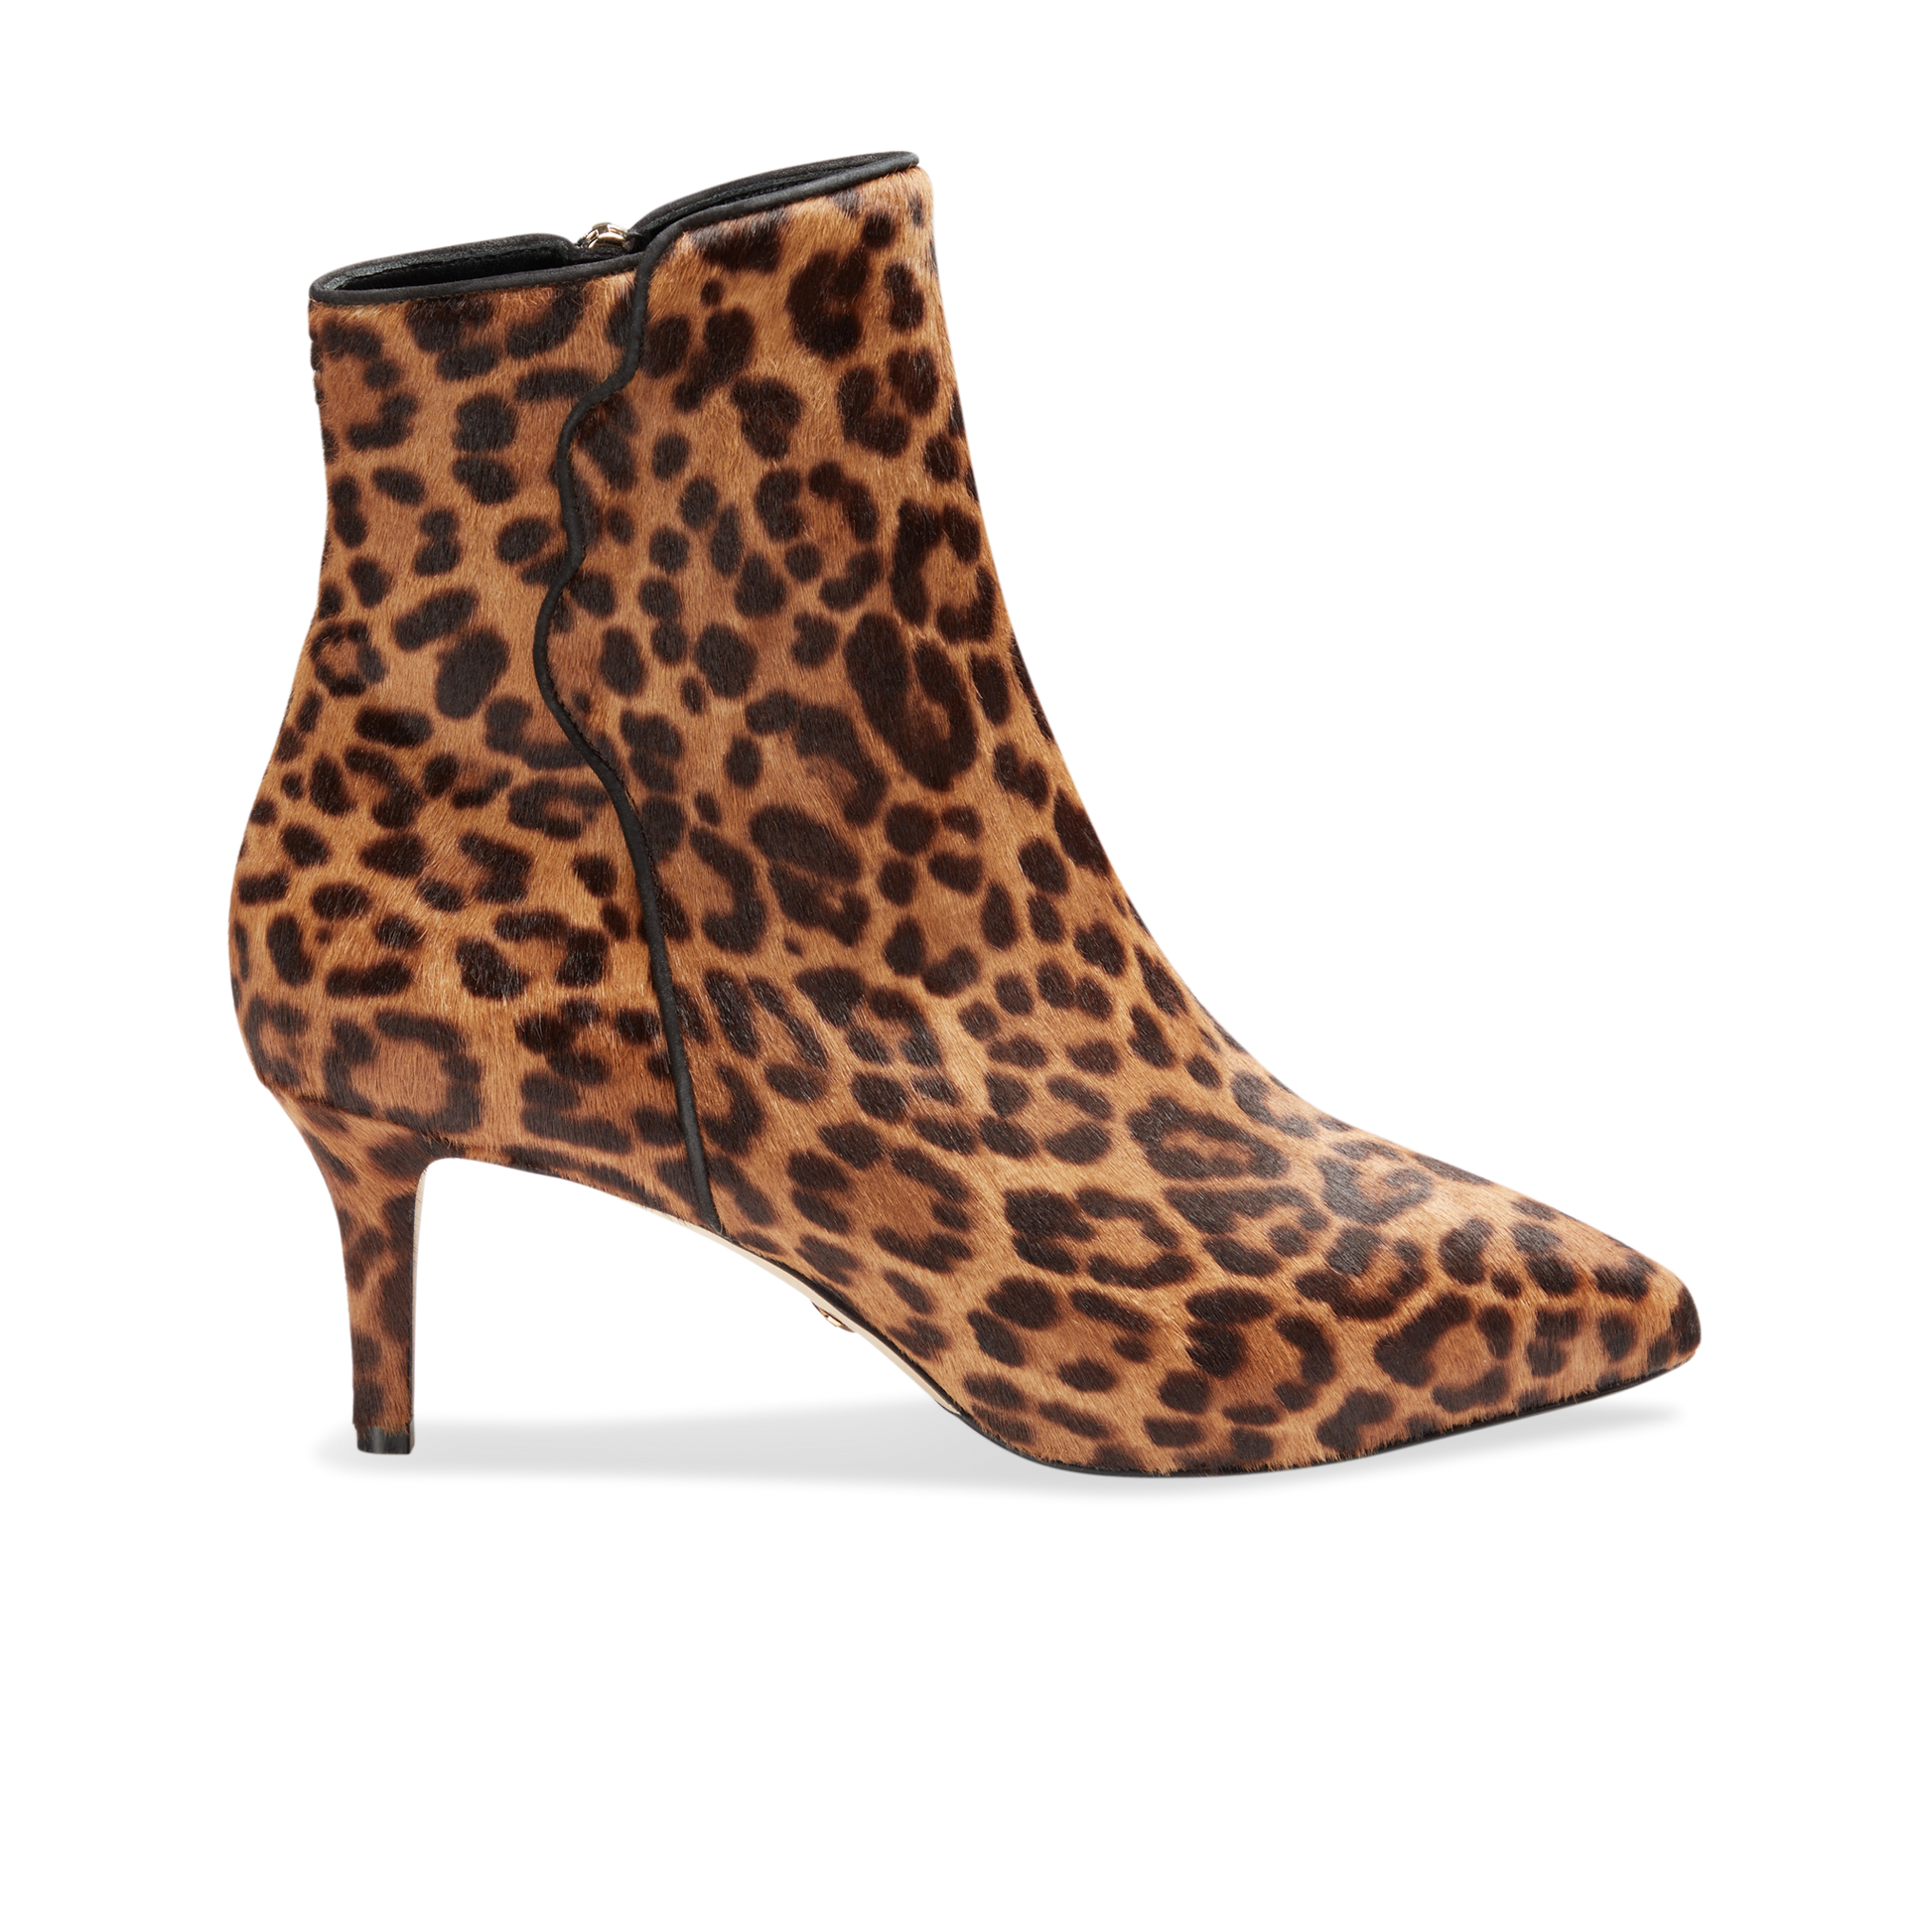 Perfect Dress Bootie 60 in Chocolate Leopard Haircalf